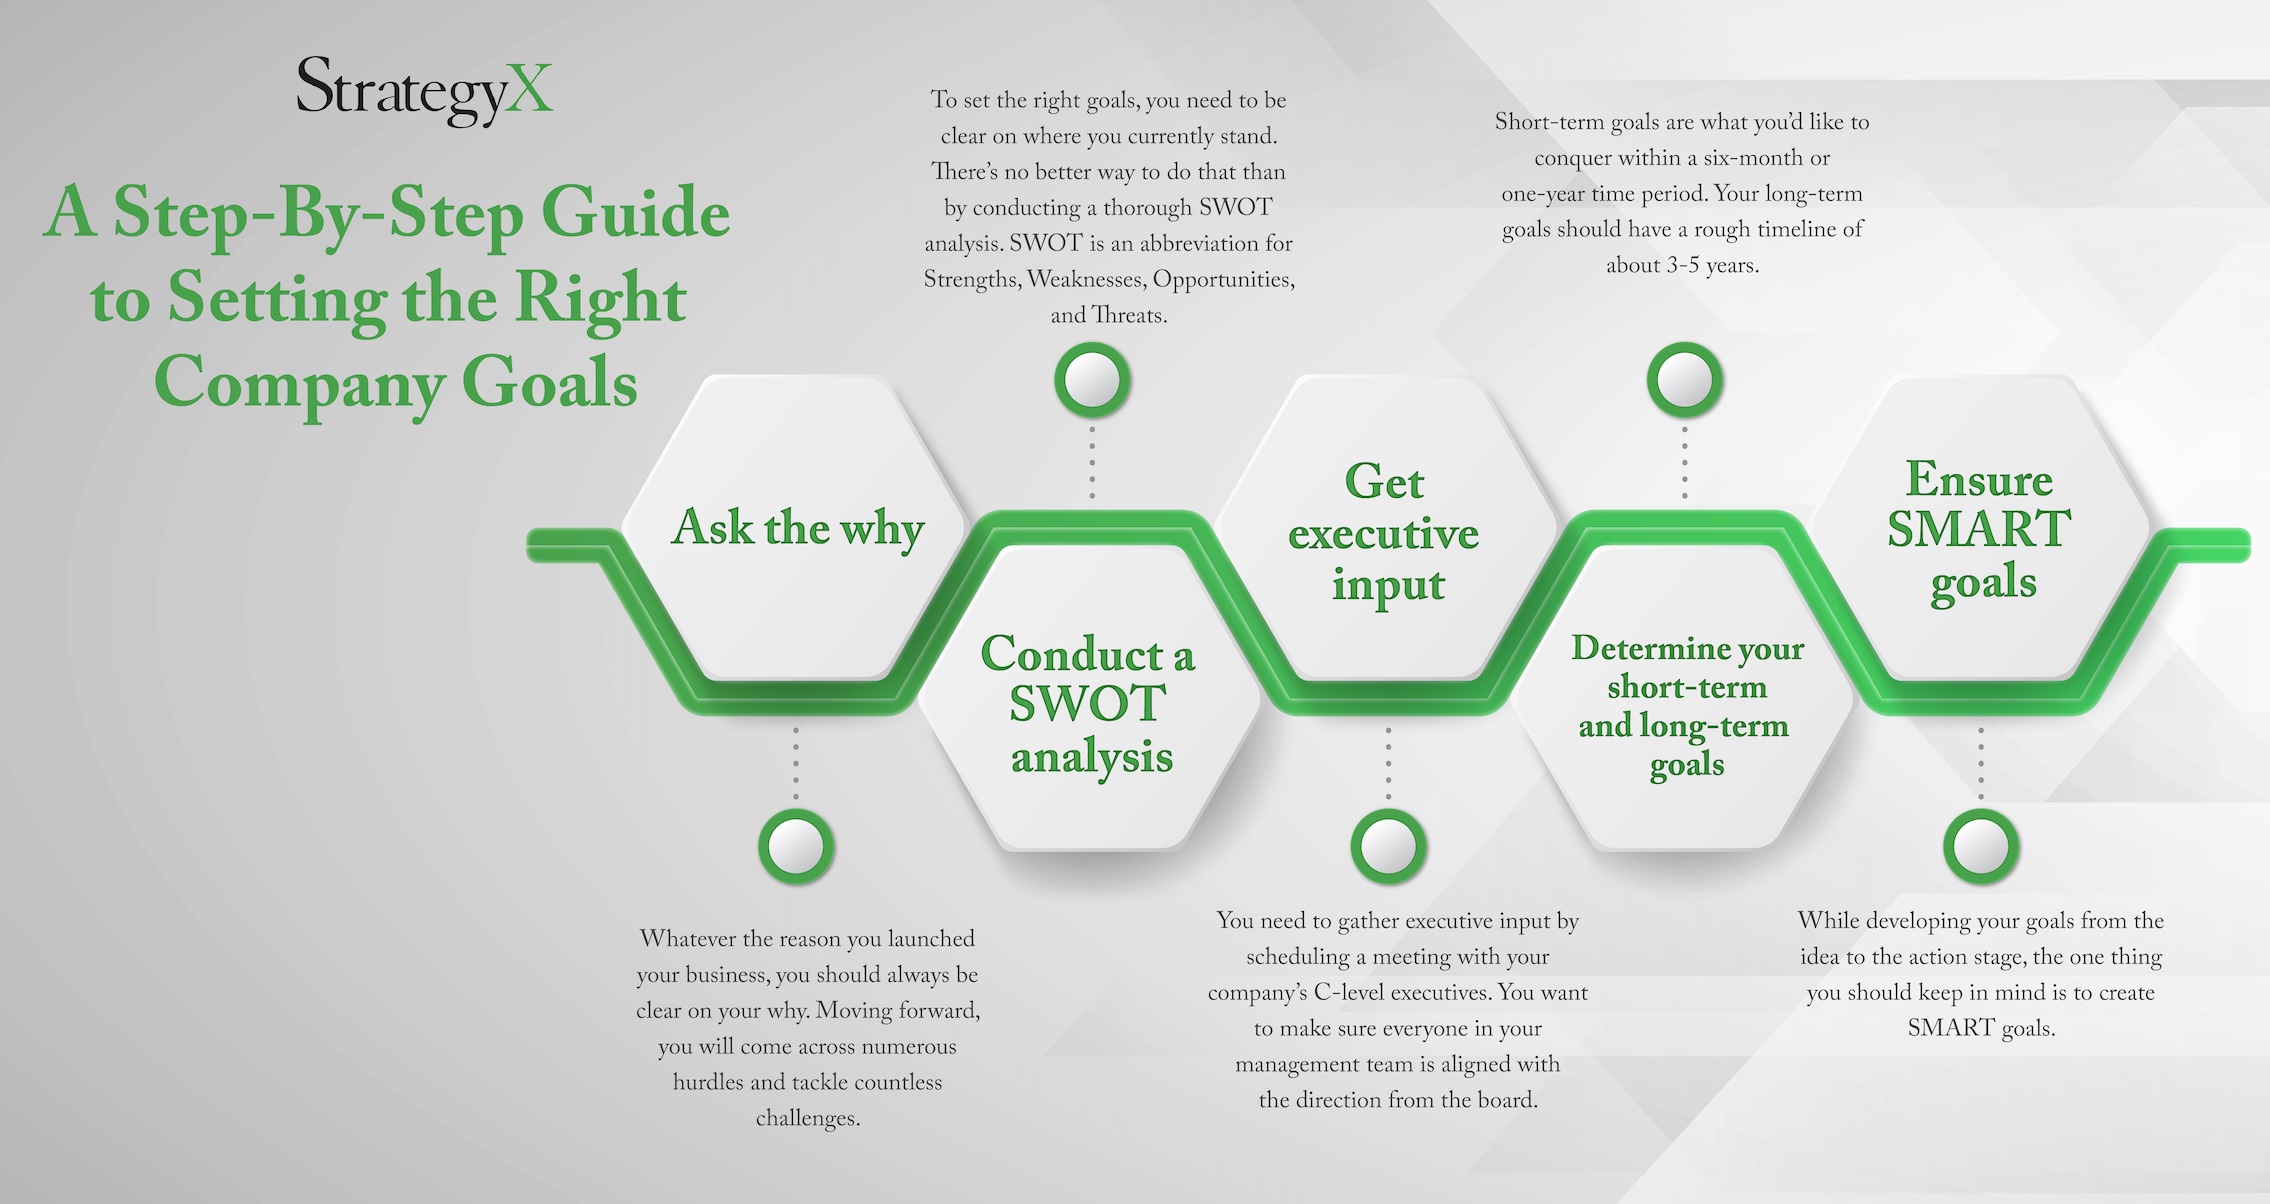 A Step-by-step guide to setting company goals